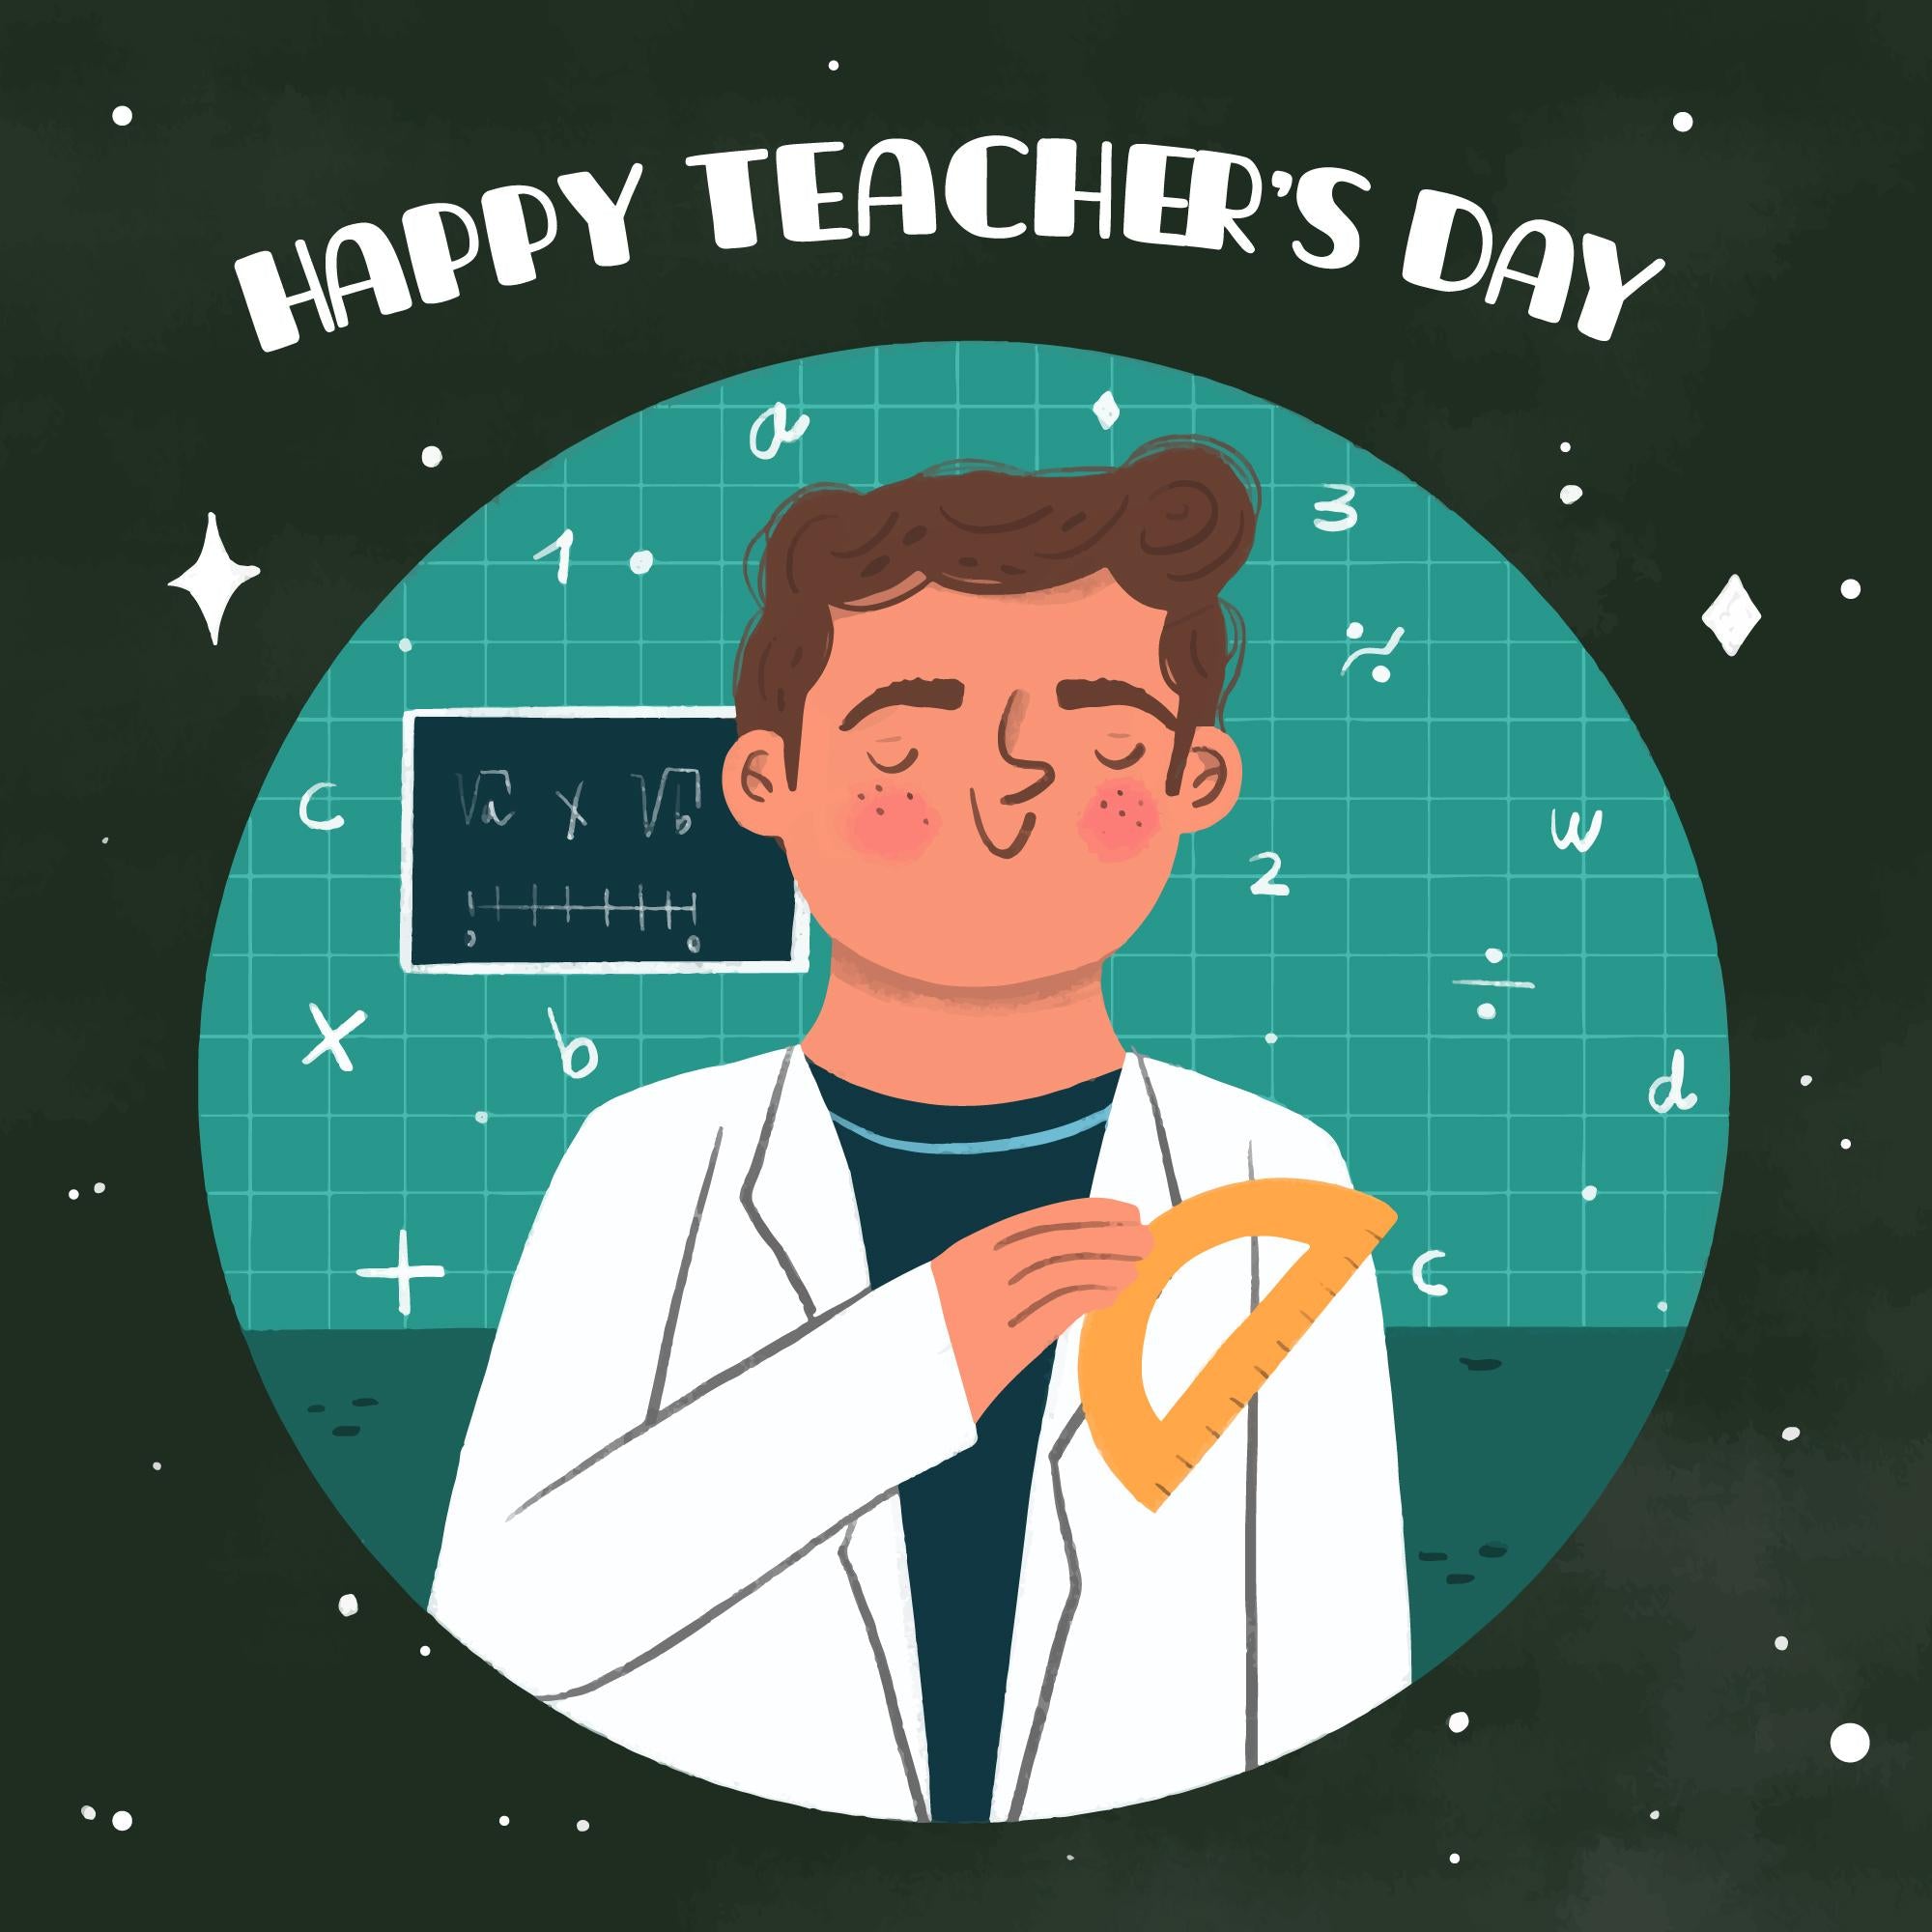 Teacher's Day Quotes & Wishes: 50 Teacher's Day One Liners, Instagram Captions, WhatsApp Messages & Memes